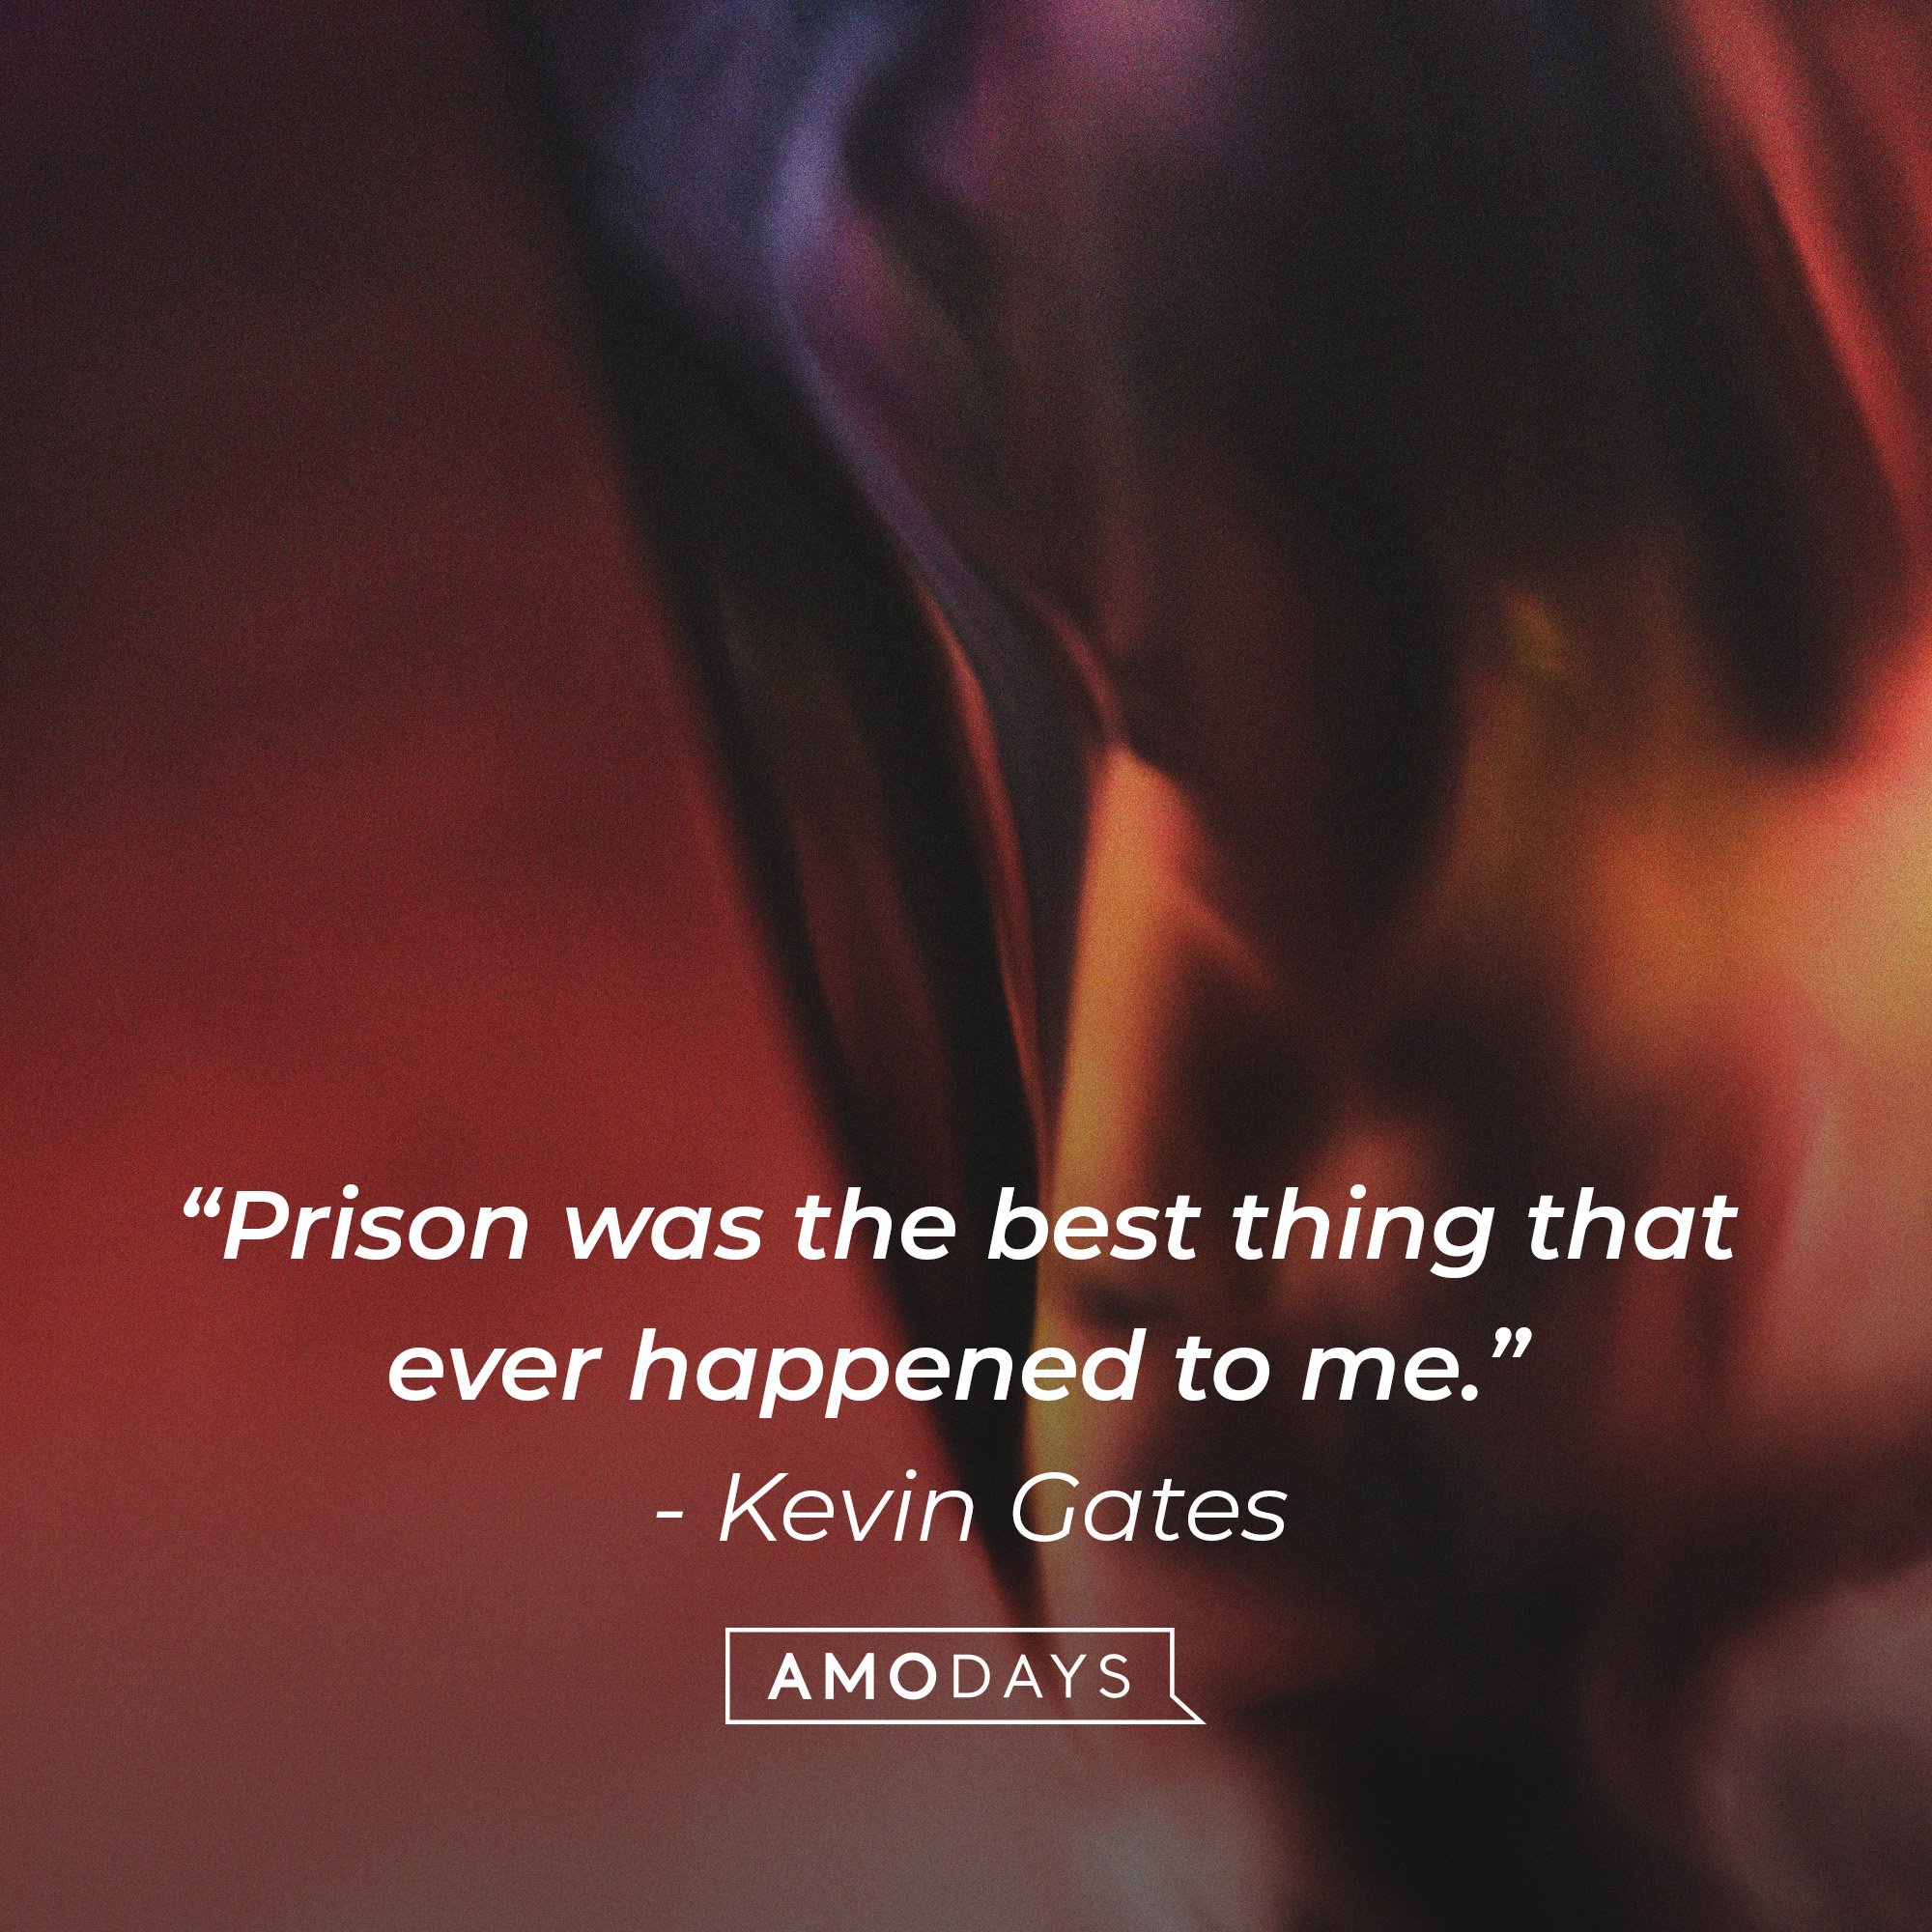 Kevin Gates’ quote: “Prison was the best thing that ever happened to me.” | Image: AmoDays